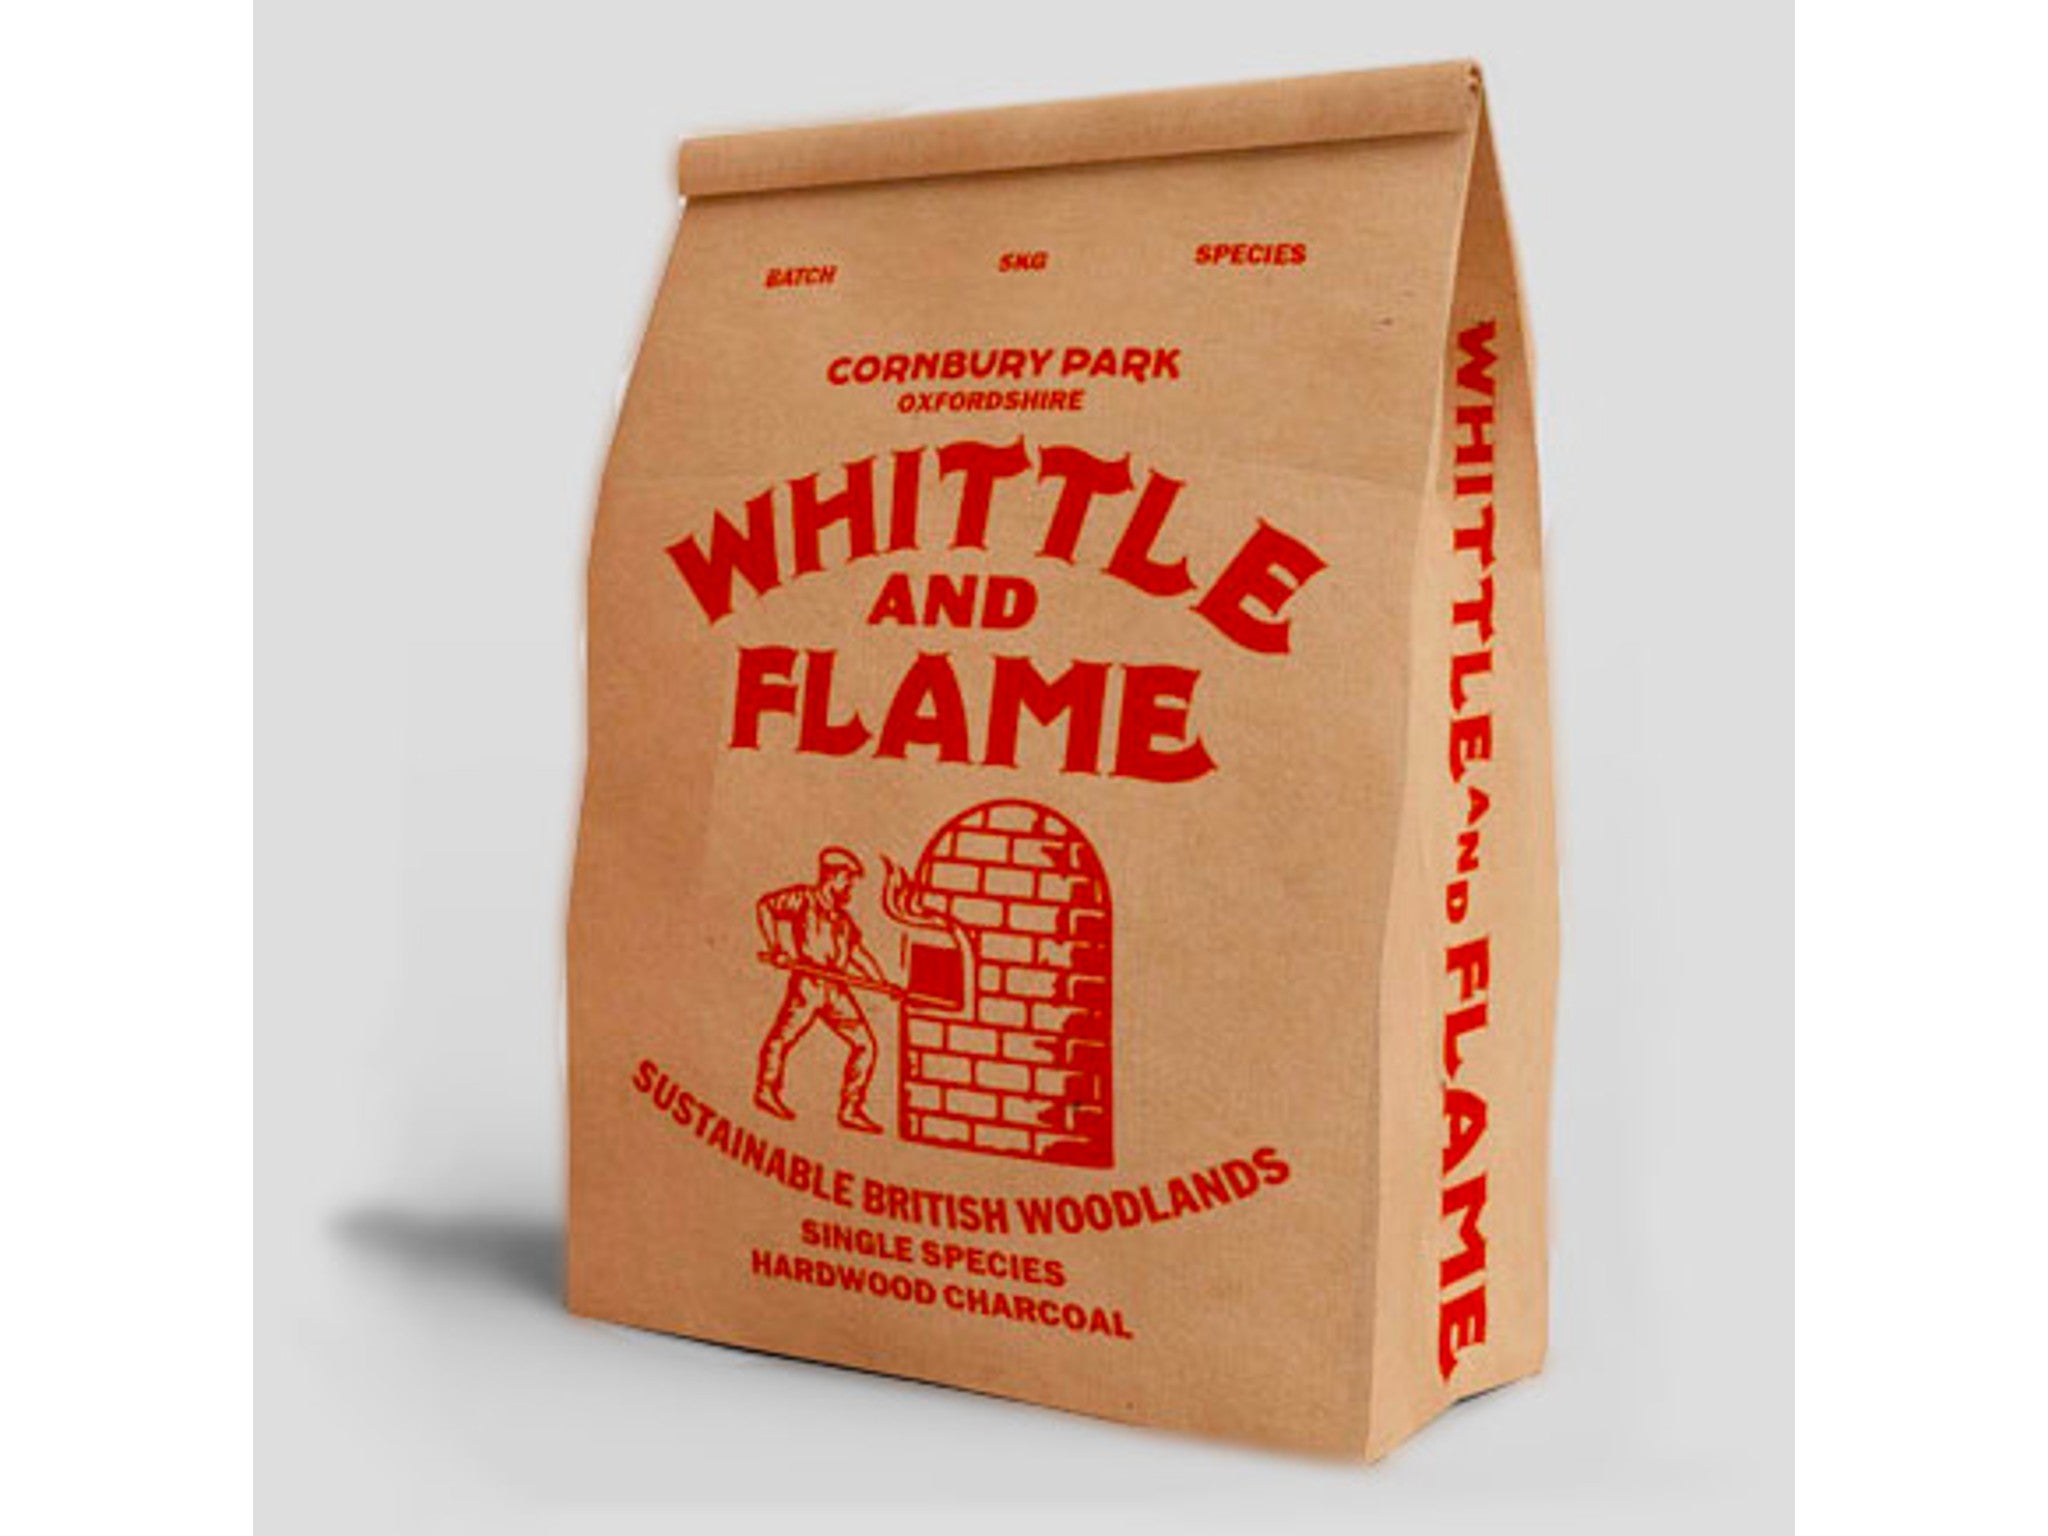 Whittle and Flame ash charcoal indybest